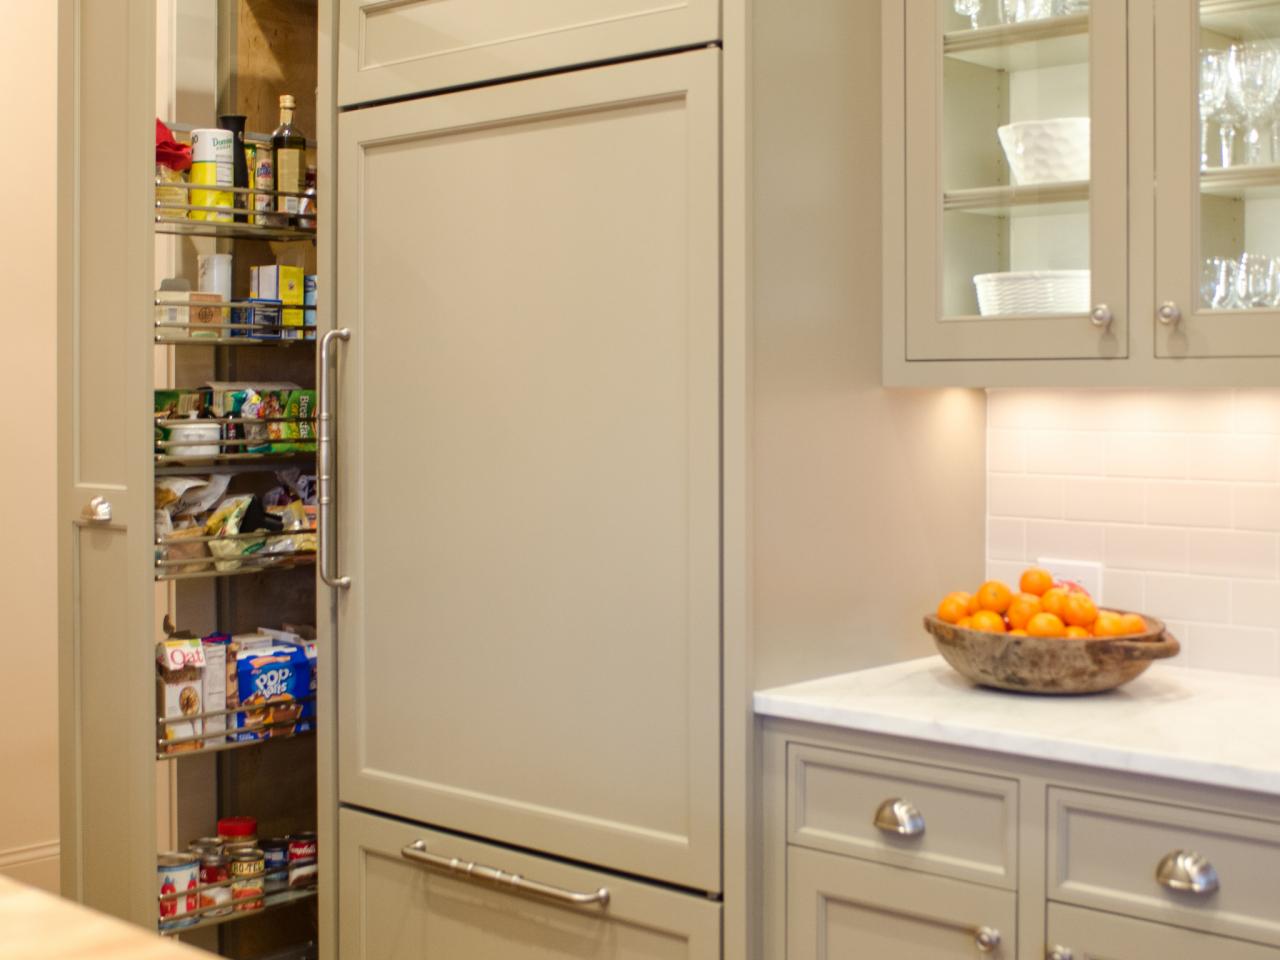 Pantry Cabinet Plans Pictures Options, Built In Pantry Cabinets For Kitchen